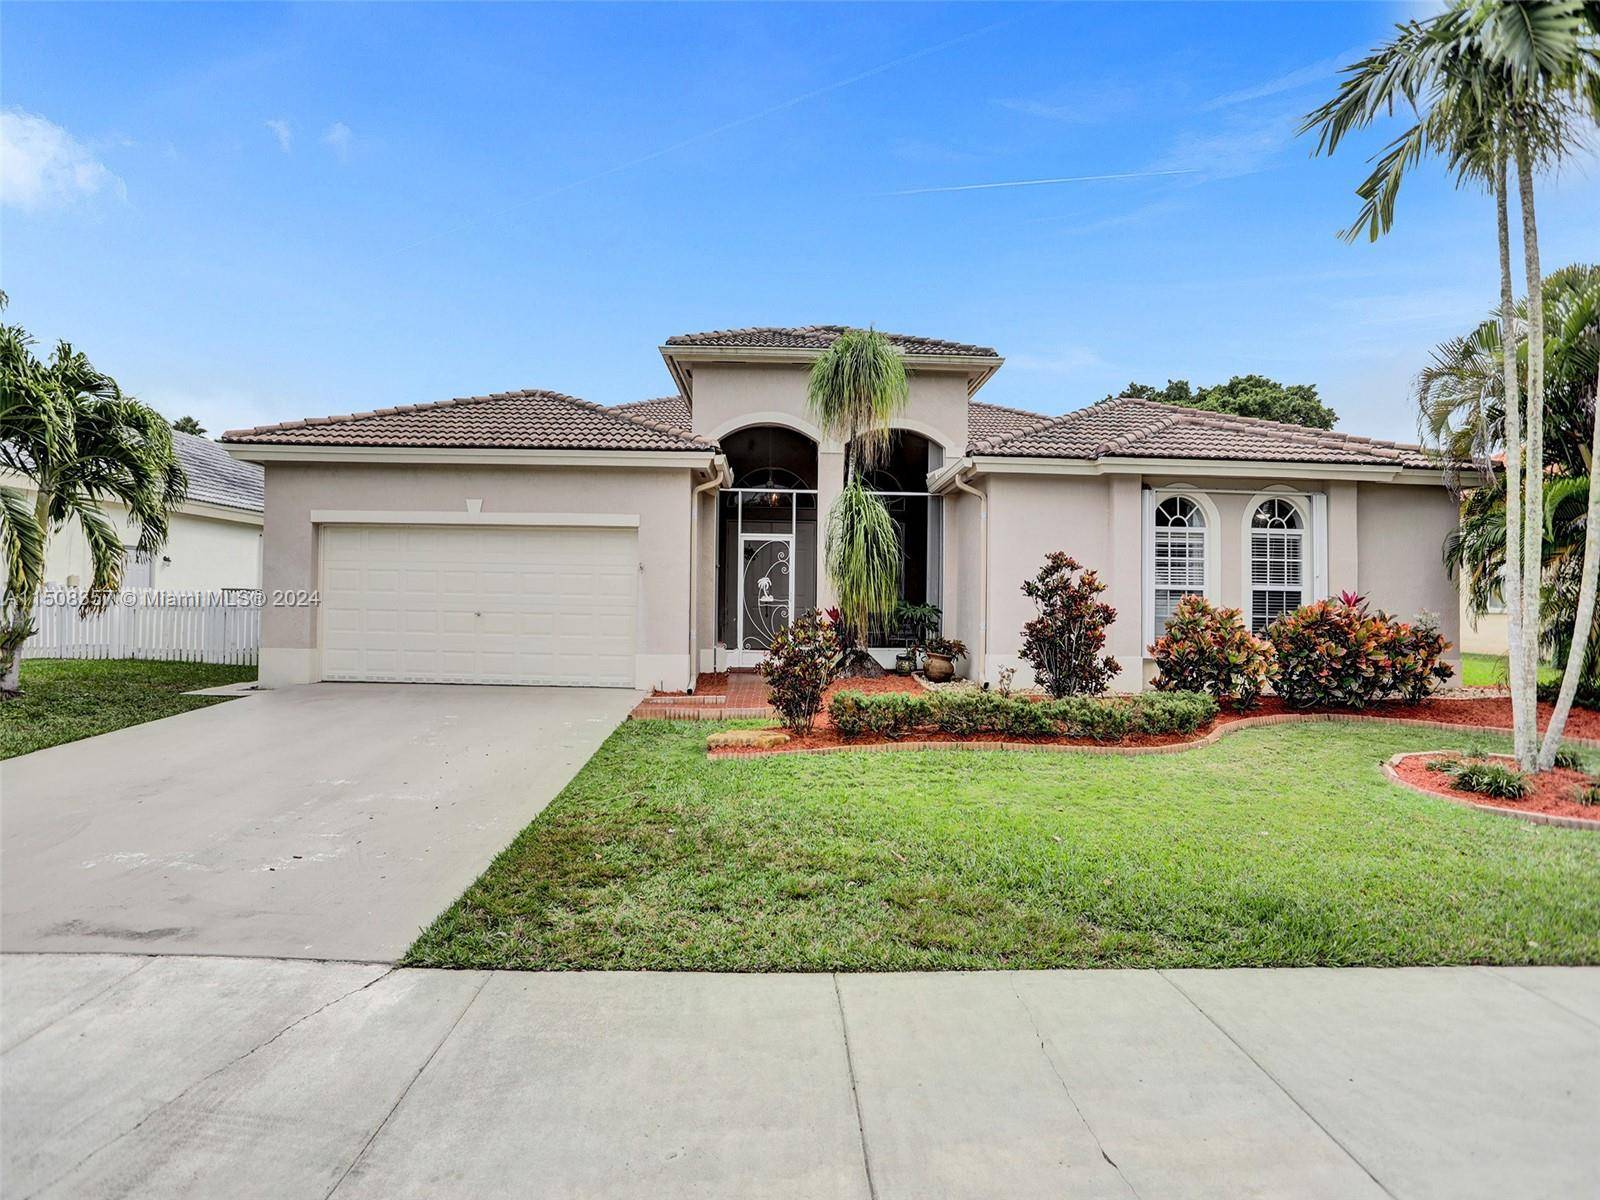 Welcome to this exquisite home located in the coveted Fairways neighborhood a prestigious enclave that offers the luxury of a golf course right at your doorstep.